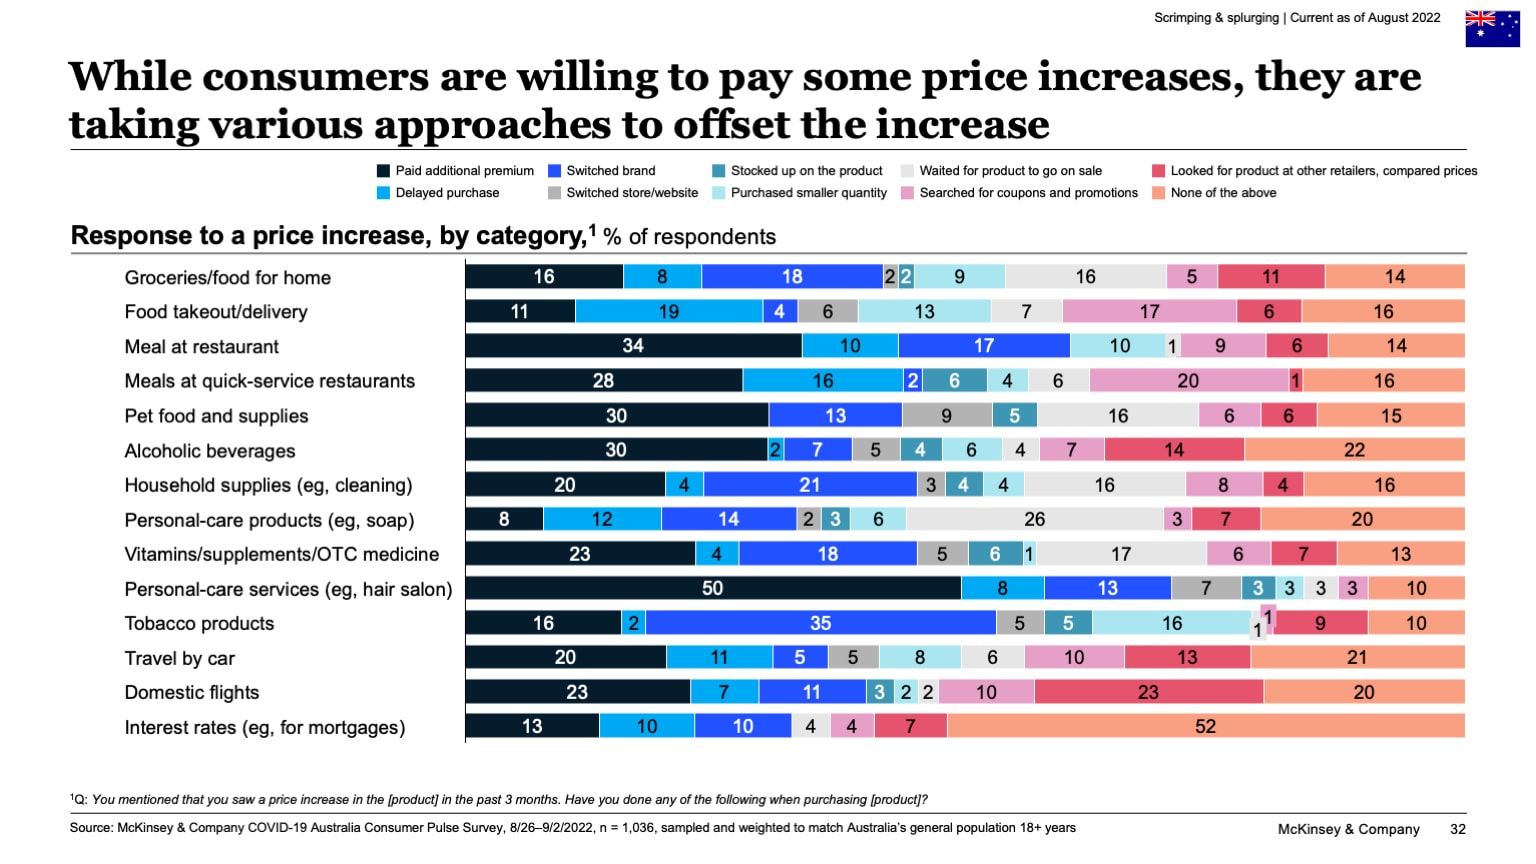 While consumers are willing to pay some price increases, they are taking various approaches to offset the increase